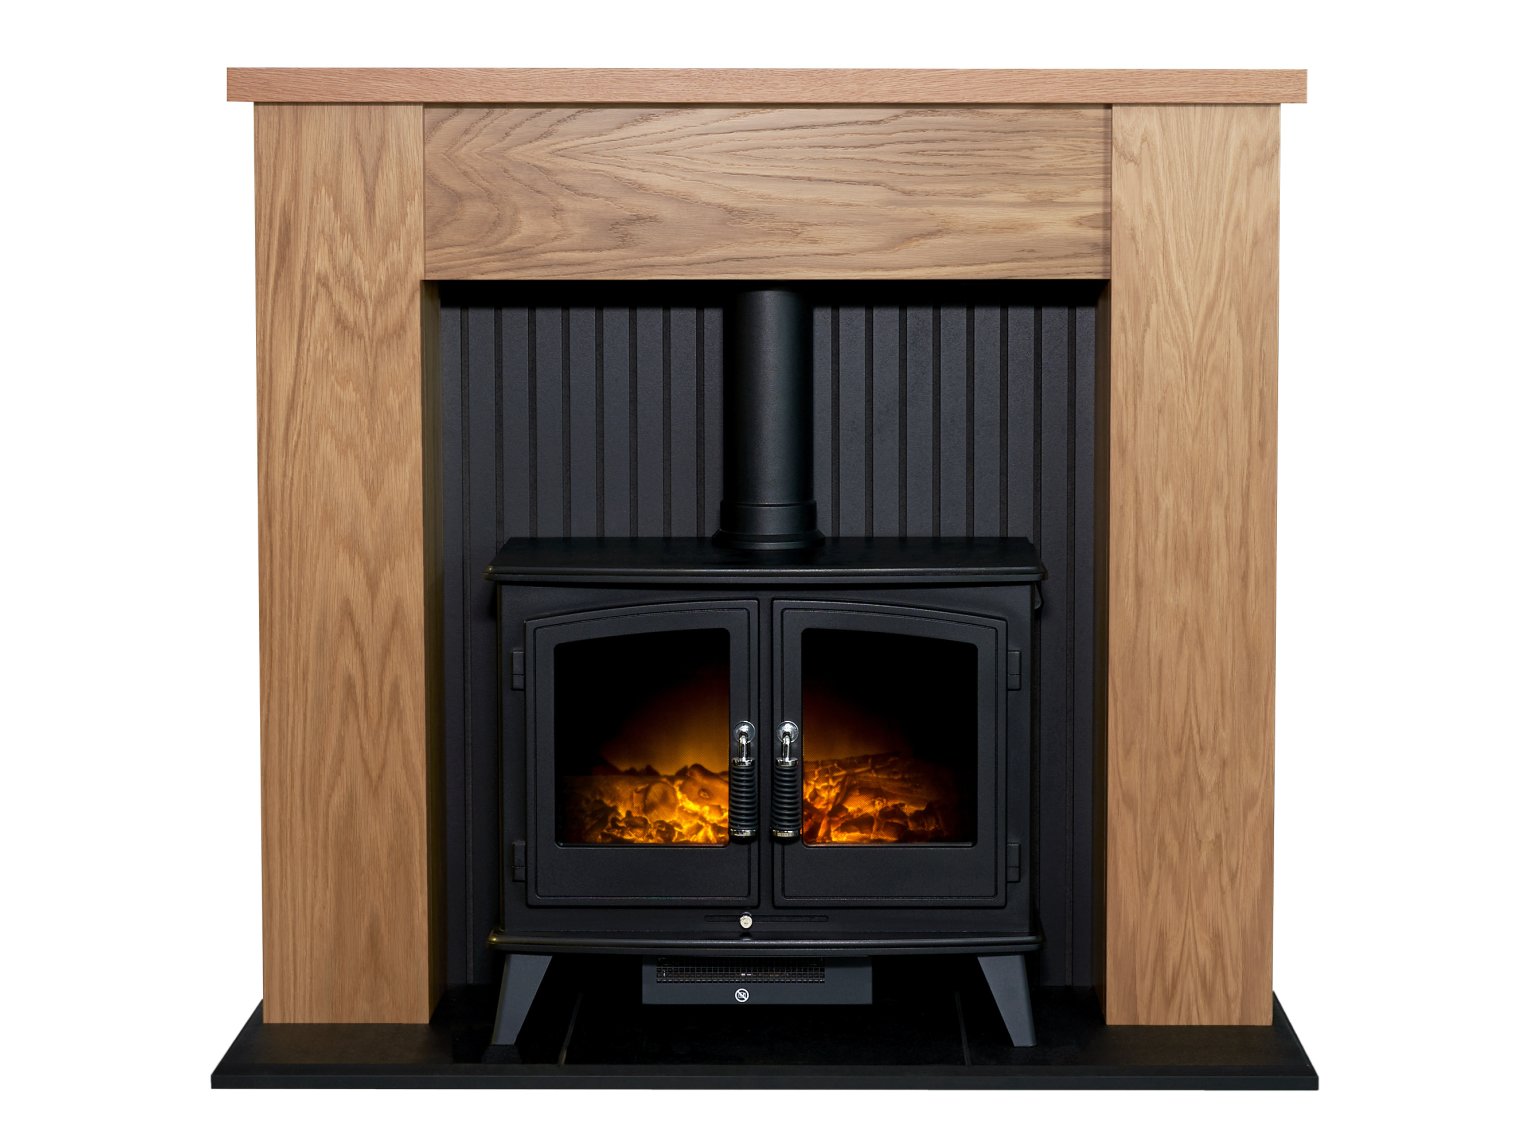 Adam New England Stove Fireplace in Oak & Black with Woodhouse Electric Stove in Black, 48 Inch